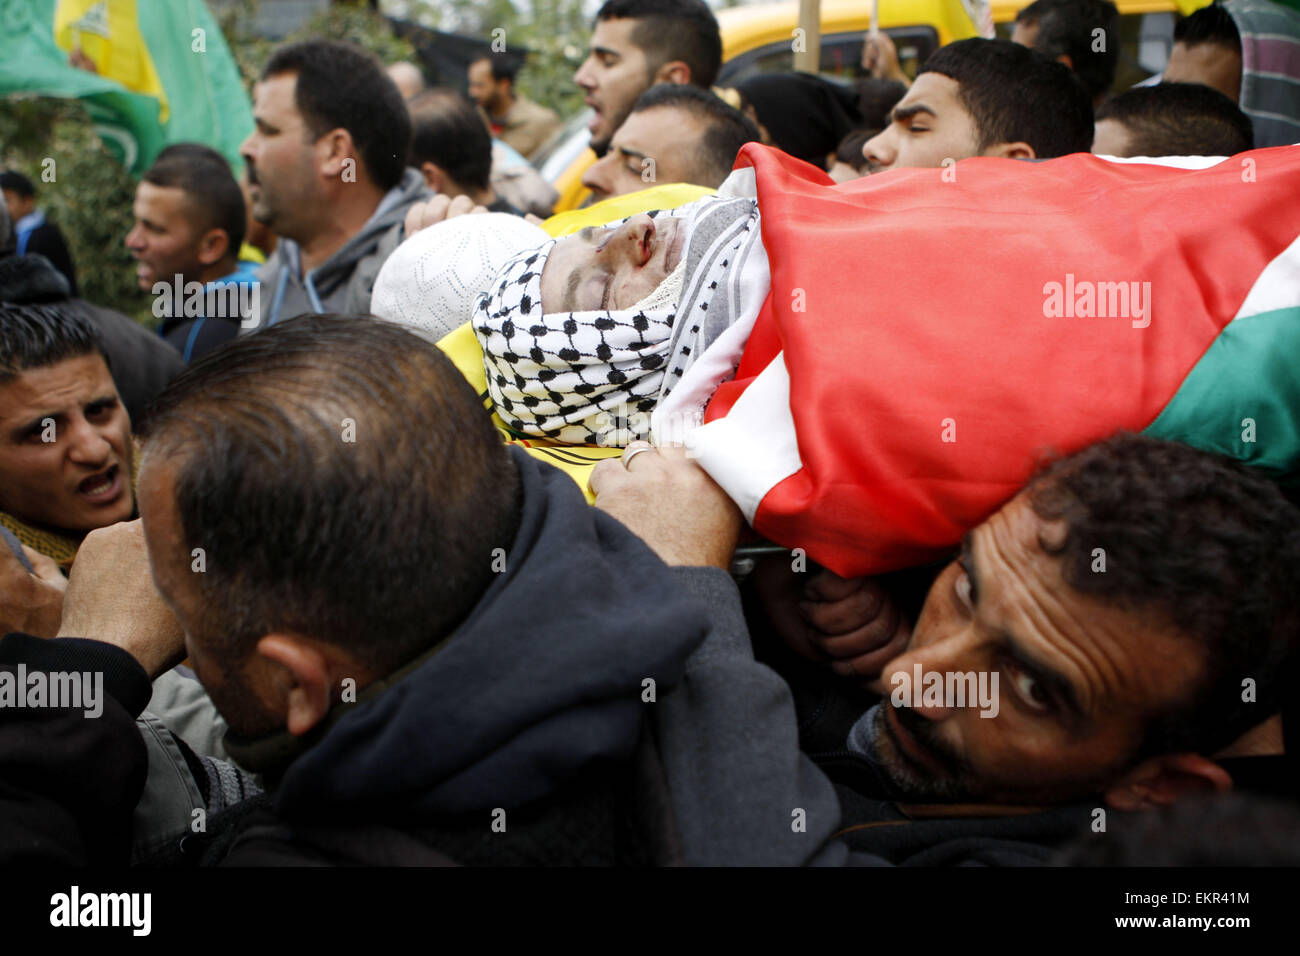 Sinjil, West Bank. 13th Apr, 2015. Mourners carry the body of 27-year-old Palestinian MOHAMMED JASSER KARAKRA, during his funeral in Sinjil village. Karakra stabbed two Israeli soldiers in the northern West Bank on April 8, 2015, wounding one seriously before being shot dead. It was the second knife attack in a week targeting Israeli soldiers and the latest in a wave of lone-wolf attacks which have been on the rise since last summer's 50-day war in the Gaza Strip. © Shadi Hatem/APA Images/ZUMA Wire/Alamy Live News Stock Photo